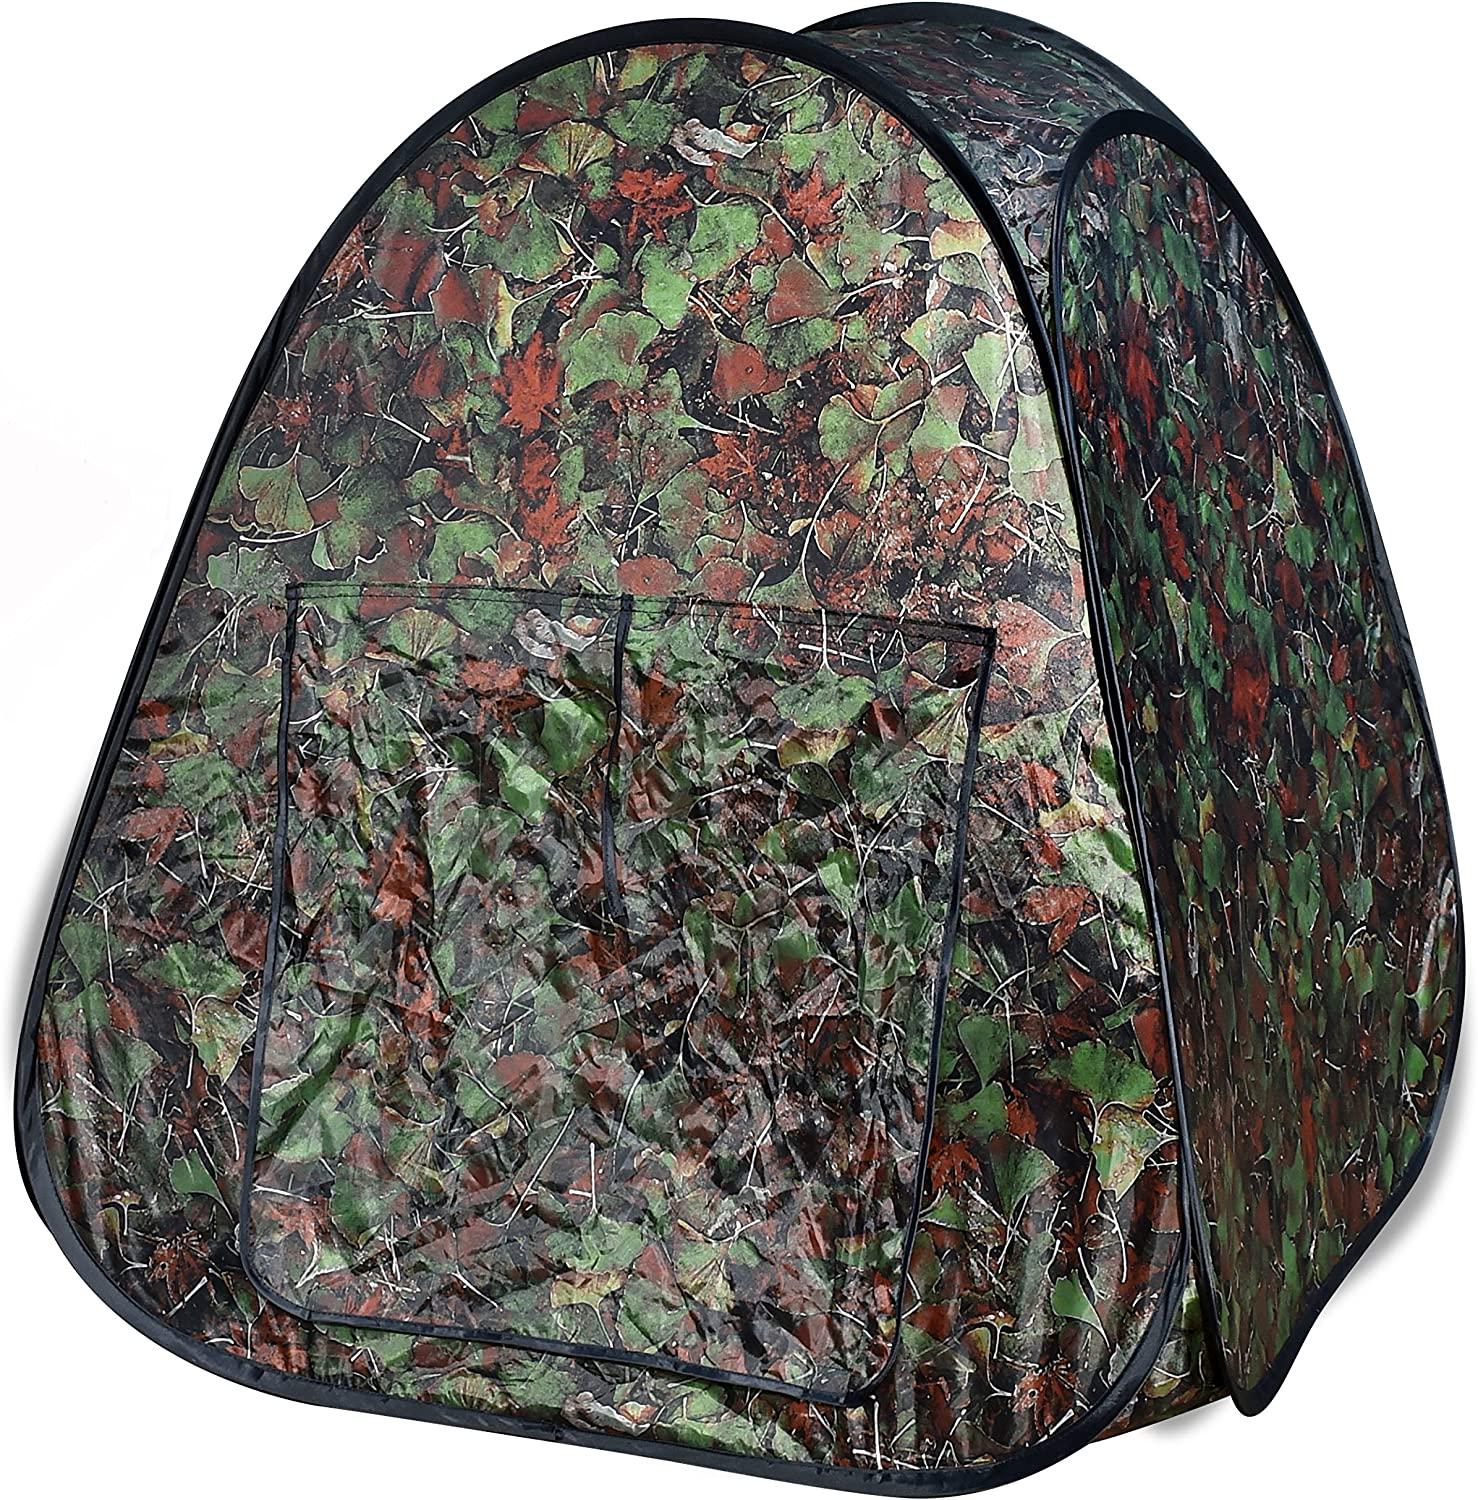 Sunny Days Entertainment, Maxx Action Hunting Series Adventure Pop Up Tent